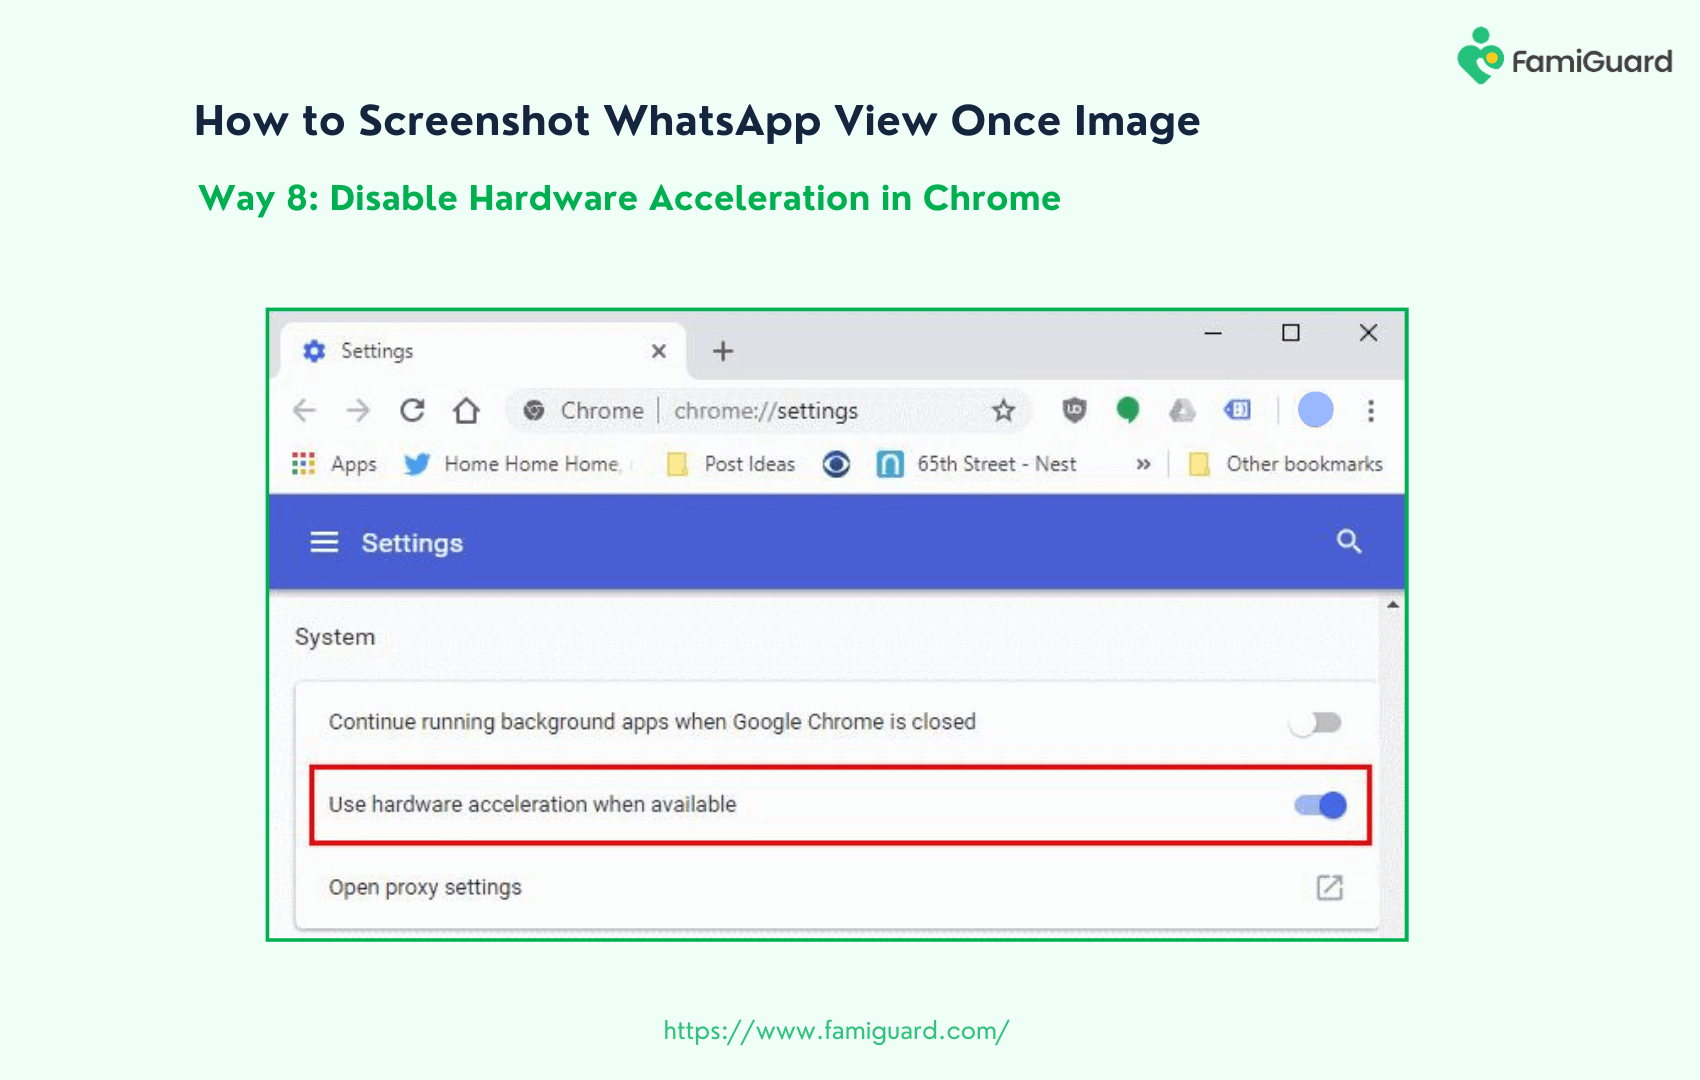 Disable Hardware Acceleration in Chrome to Screenshot WhatsApp View Once Image